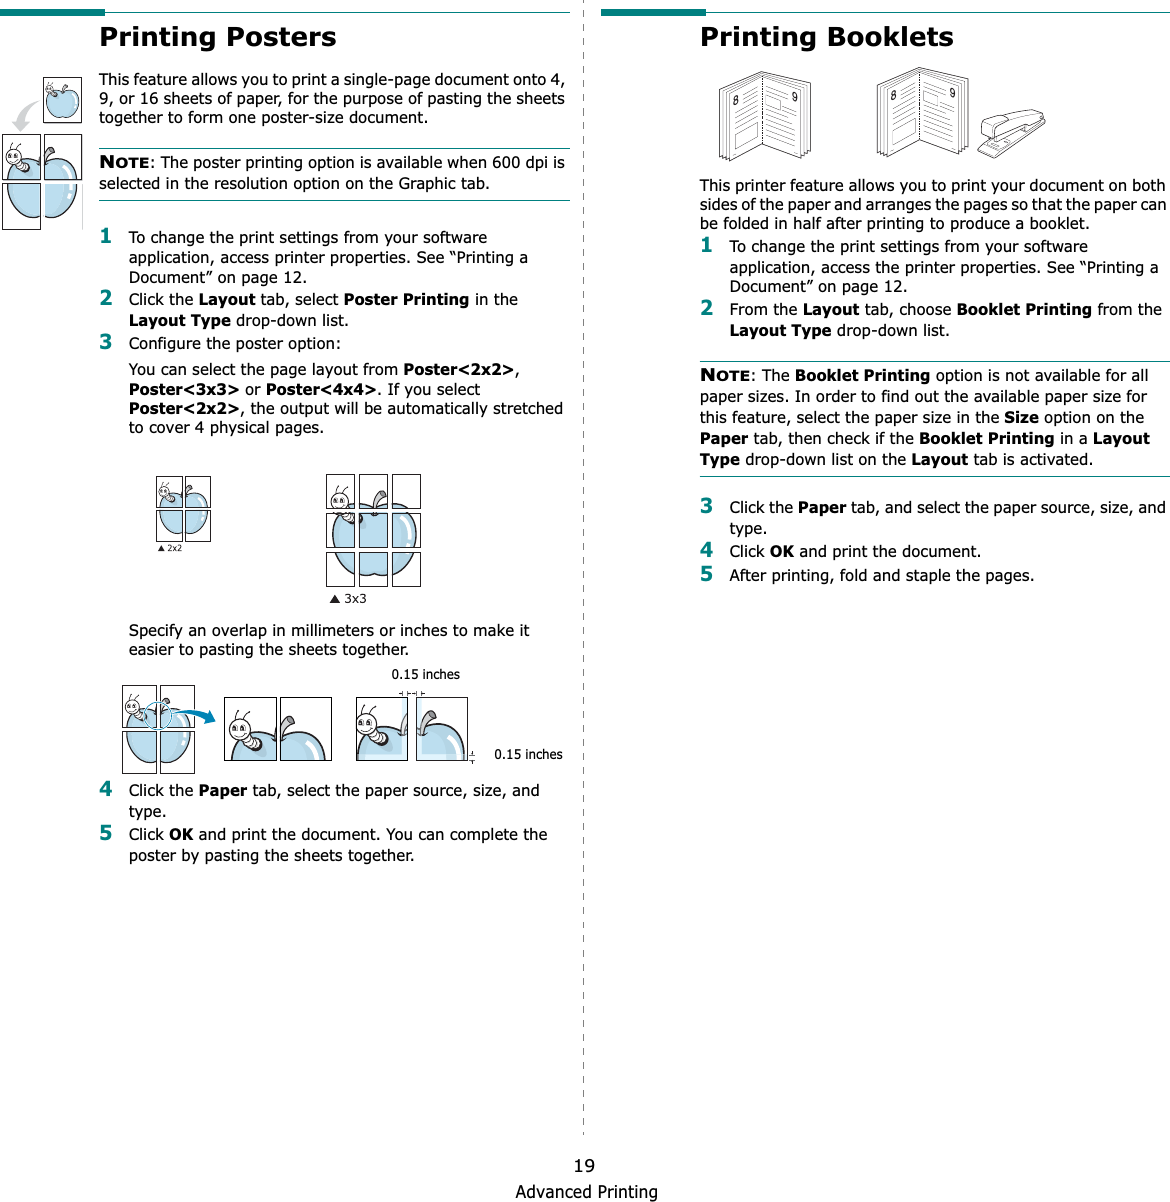 Advanced Printing19Printing PostersThis feature allows you to print a single-page document onto 4, 9, or 16 sheets of paper, for the purpose of pasting the sheets together to form one poster-size document.NOTE:GThe poster printing option is available when 600 dpi is selected in the resolution option on the Graphic tab.1To change the print settings from your software application, access printer properties. See “Printing a Document” on page 12.2Click the Layout tab, select Poster Printing in the Layout Type drop-down list.3Configure the poster option:You can select the page layout from Poster&lt;2x2&gt;,Poster&lt;3x3&gt; or Poster&lt;4x4&gt;. If you select Poster&lt;2x2&gt;, the output will be automatically stretched to cover 4 physical pages.Specify an overlap in millimeters or inches to make it easier to pasting the sheets together. 4Click the Paper tab, select the paper source, size, and type.5Click OK and print the document. You can complete the poster by pasting the sheets together. 0.15 inches0.15 inchesPrinting Booklets This printer feature allows you to print your document on both sides of the paper and arranges the pages so that the paper can be folded in half after printing to produce a booklet. 1To change the print settings from your software application, access the printer properties. See “Printing a Document” on page 12.2From the Layout tab, choose Booklet Printing from the Layout Type drop-down list. NOTE: The Booklet Printing option is not available for all paper sizes. In order to find out the available paper size for this feature, select the paper size in the Size option on the Paper tab, then check if the Booklet Printing in a Layout Type drop-down list on the Layout tab is activated.3Click the Paper tab, and select the paper source, size, and type.4Click OK and print the document.5After printing, fold and staple the pages. 8989